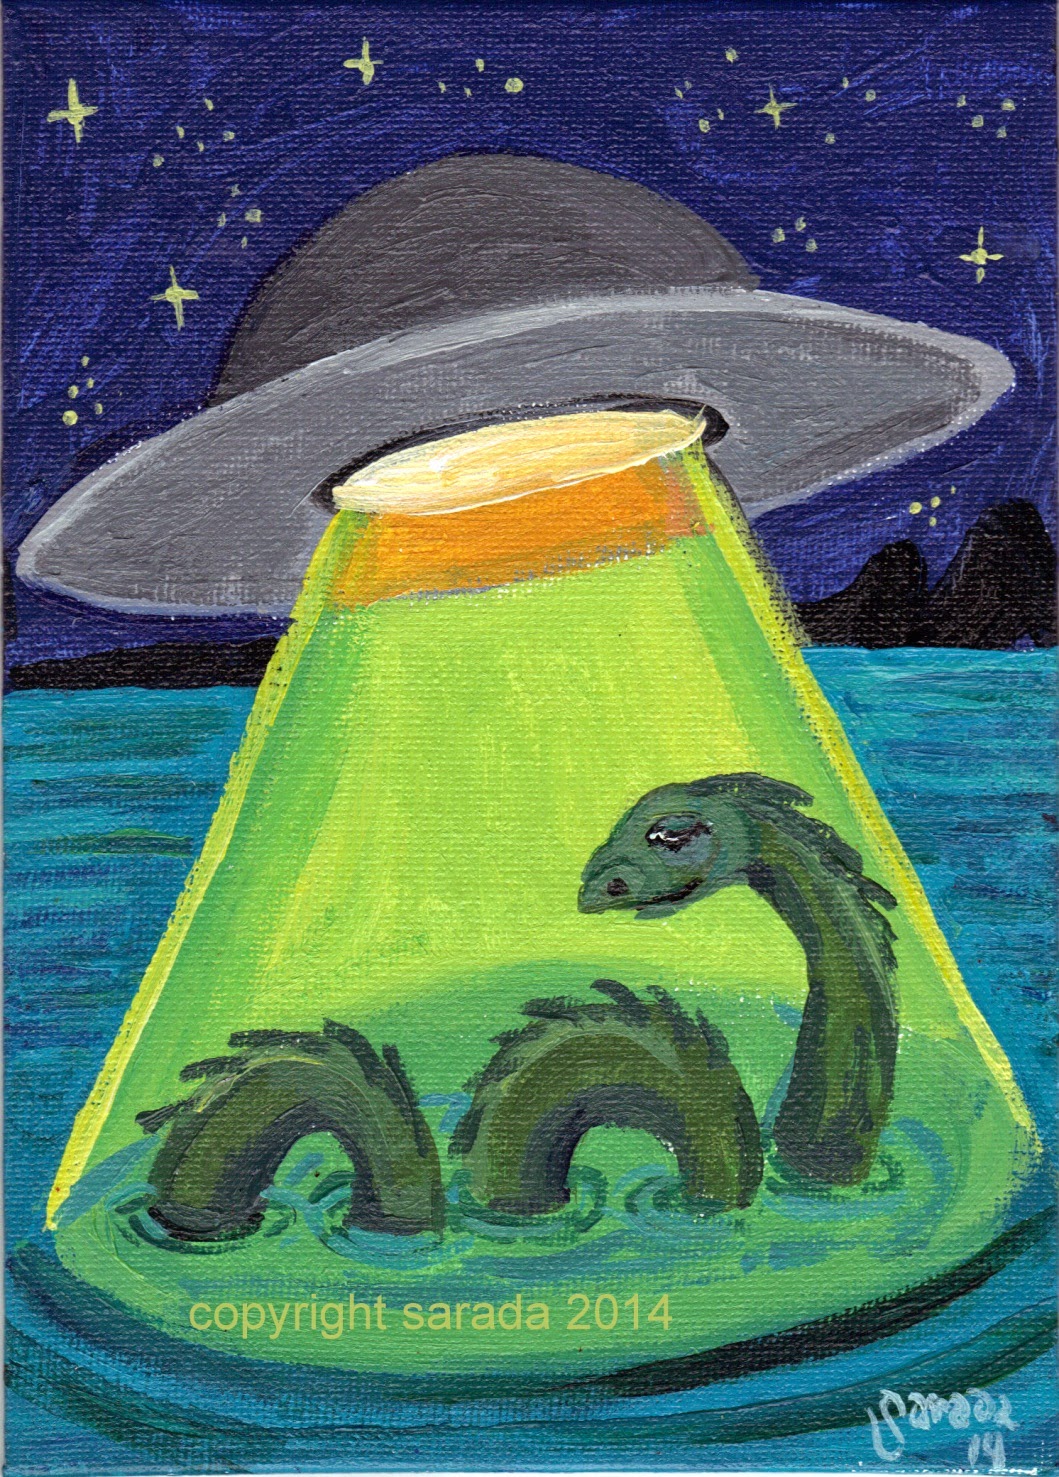 https://www.etsy.com/listing/199592783/ufo-abduction-loch-ness-monster-print-5?ref=shop_home_active_4